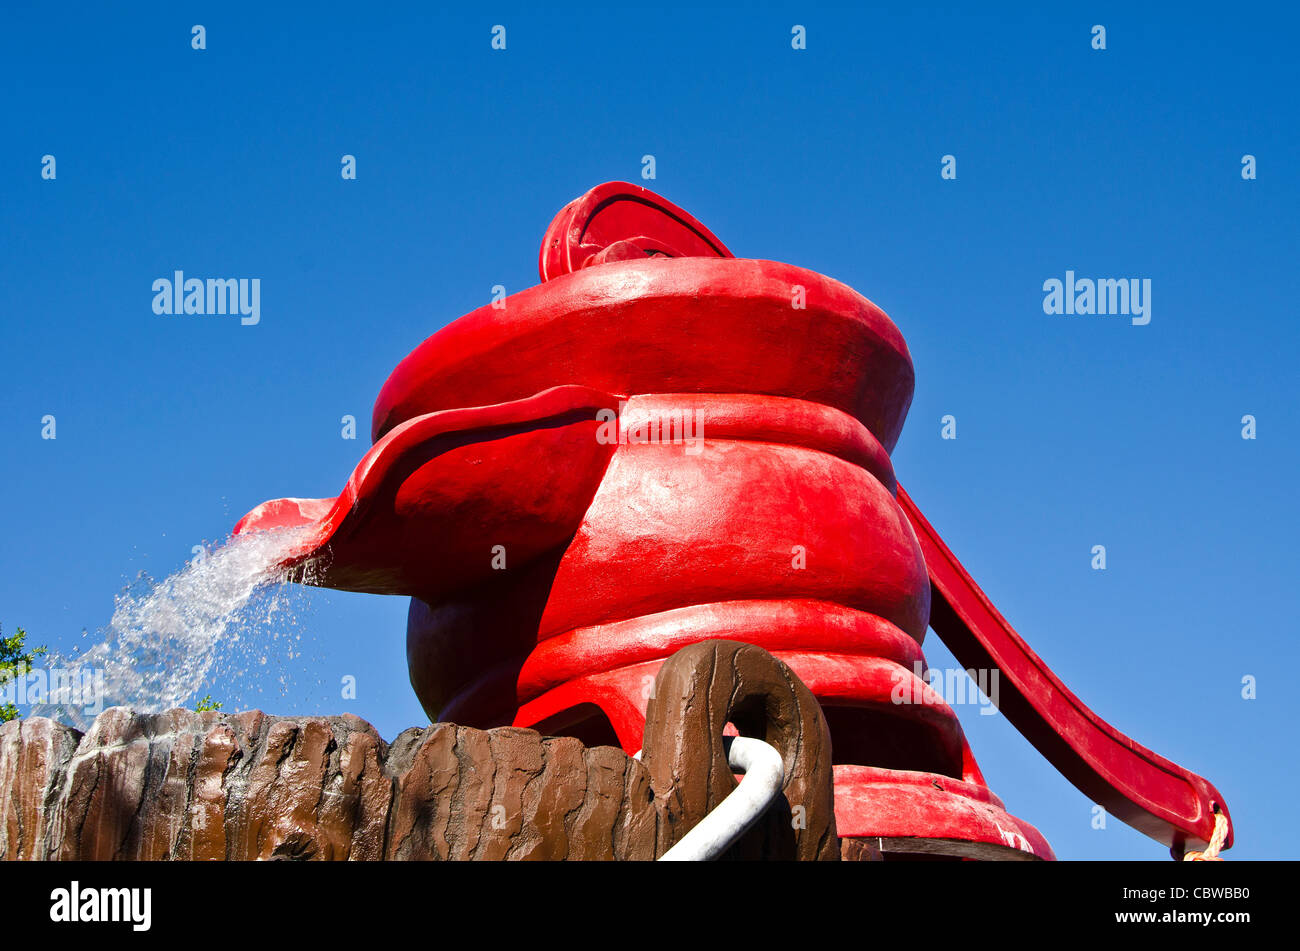 Fivels Playland kids playground with huge red water pump at at Universal Studios Orlando Florida Stock Photo